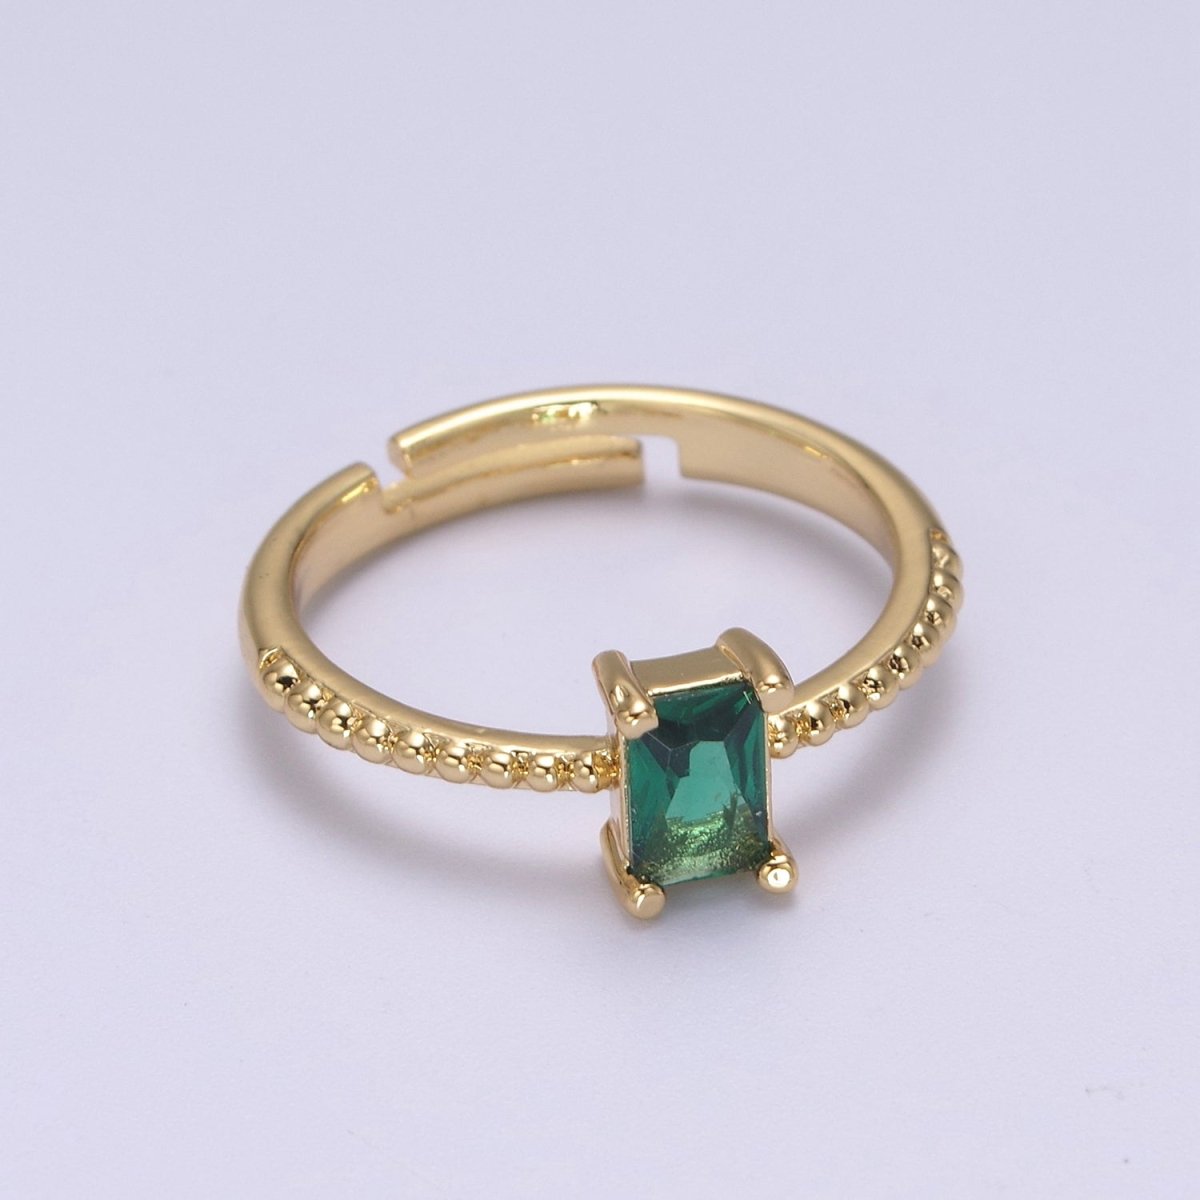 Baguette Crystal Zirconia Dainty 24K Gold Filled Adjustable Solitaire Ring with Beaded Band U-293~U-299 - DLUXCA